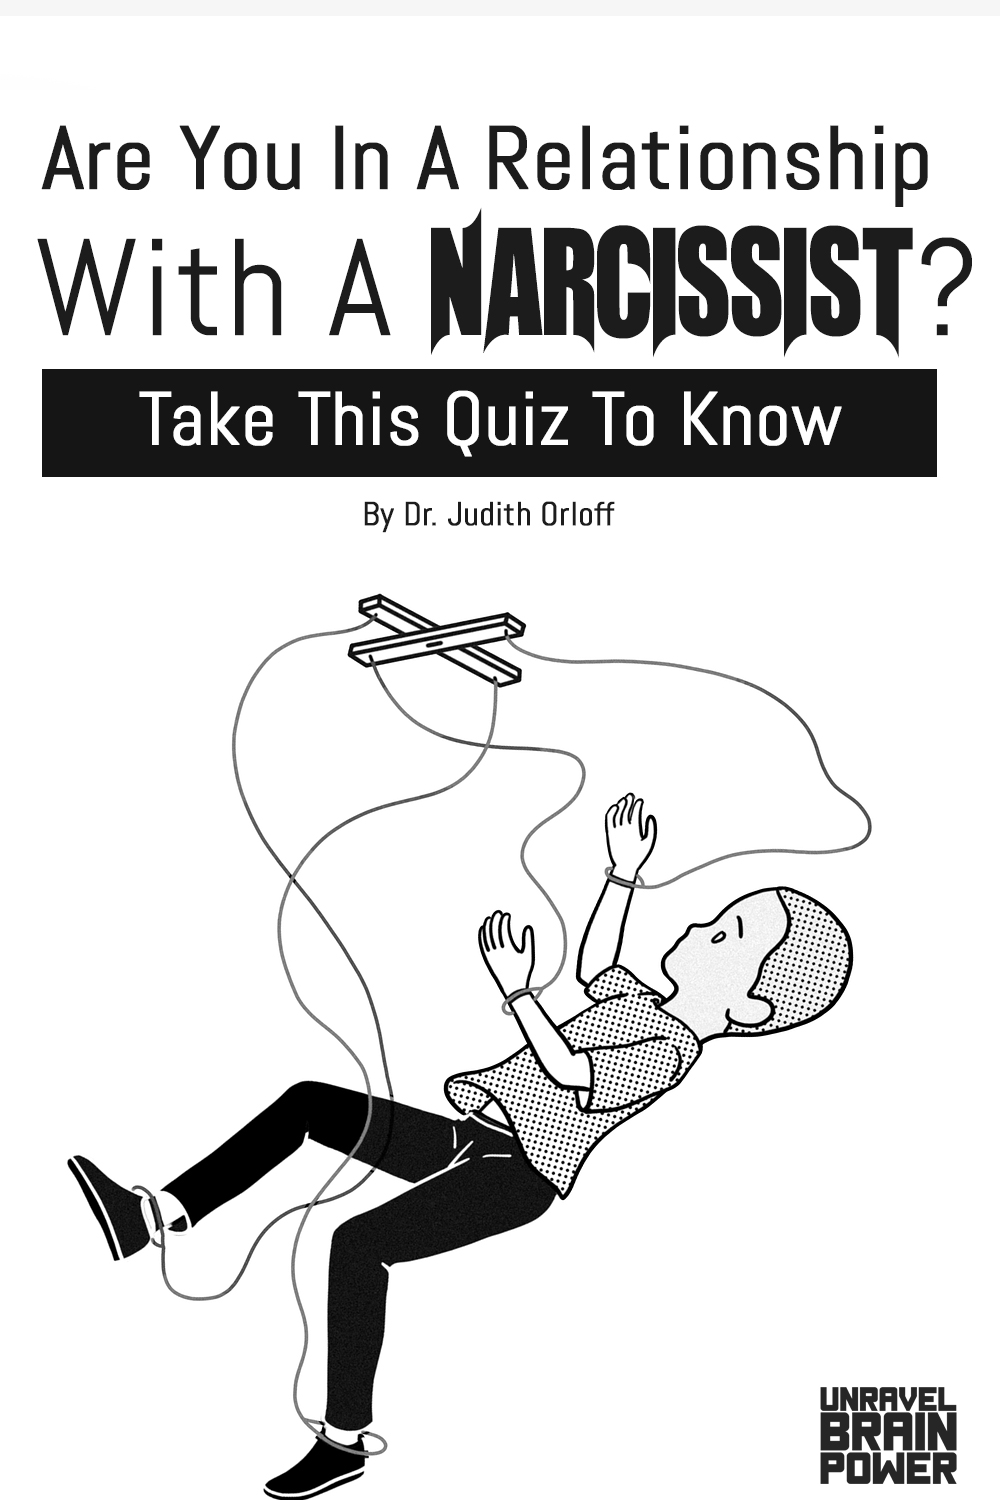 Are You In A Relationship With A Narcissist? Take This